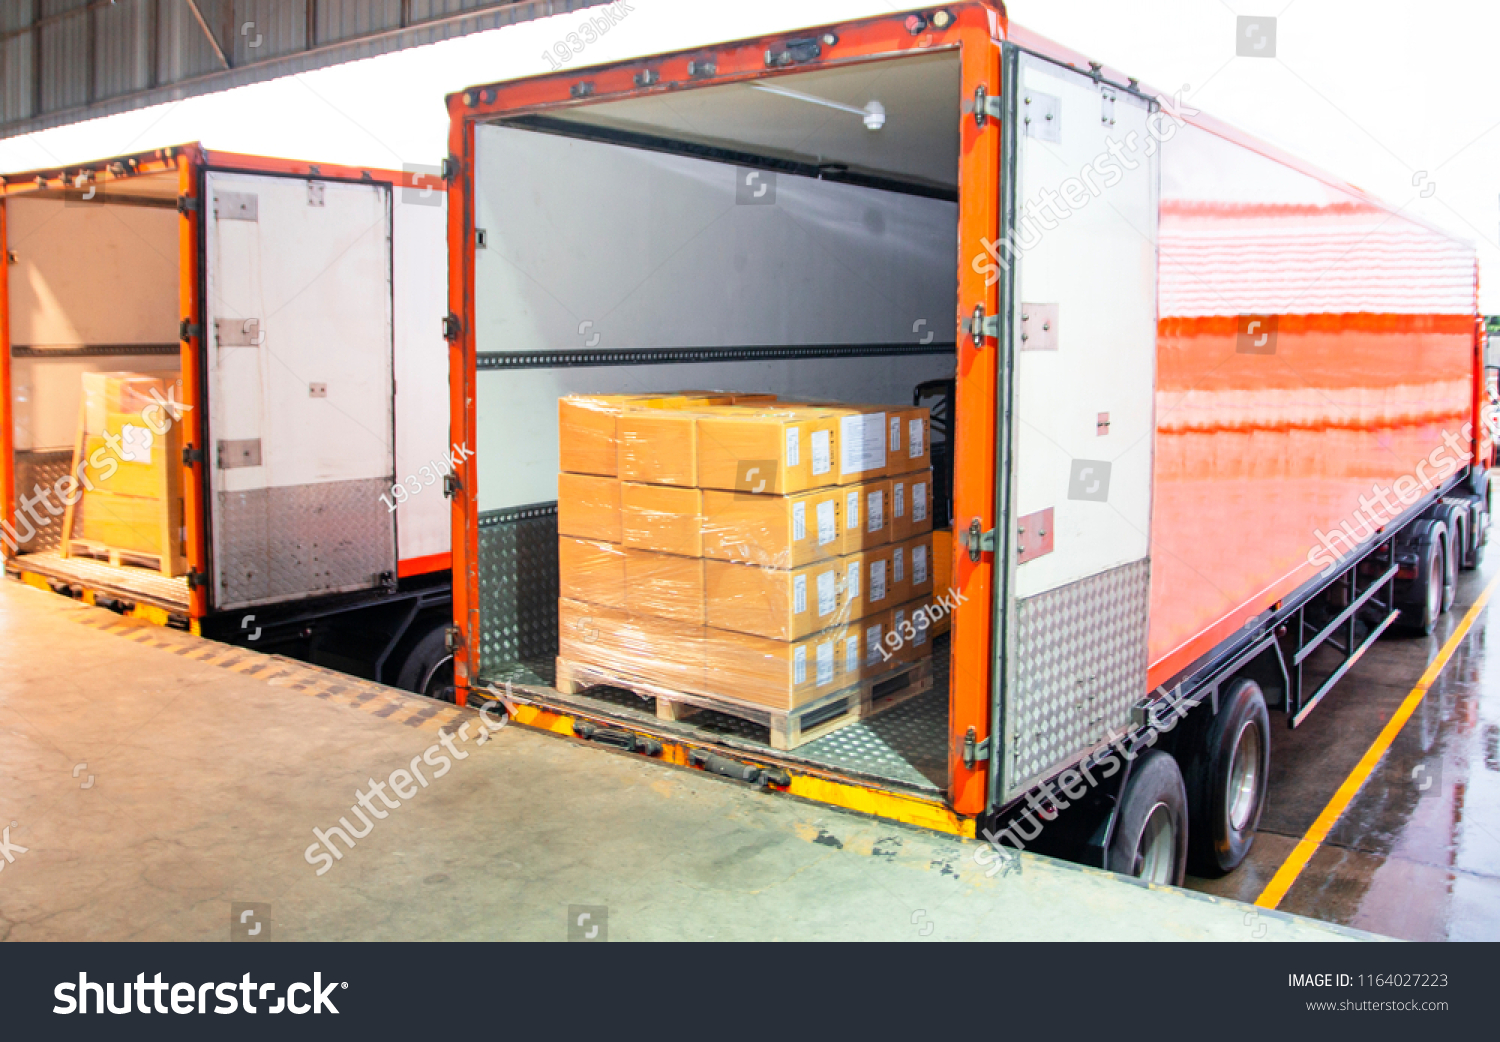 Cargo freight truck. Shipment, Delivery service. Logistics and transportation. Warehouse dock load pallet goods into shipping container truck. Stacked package boxes on pallet inside a truck. #1164027223